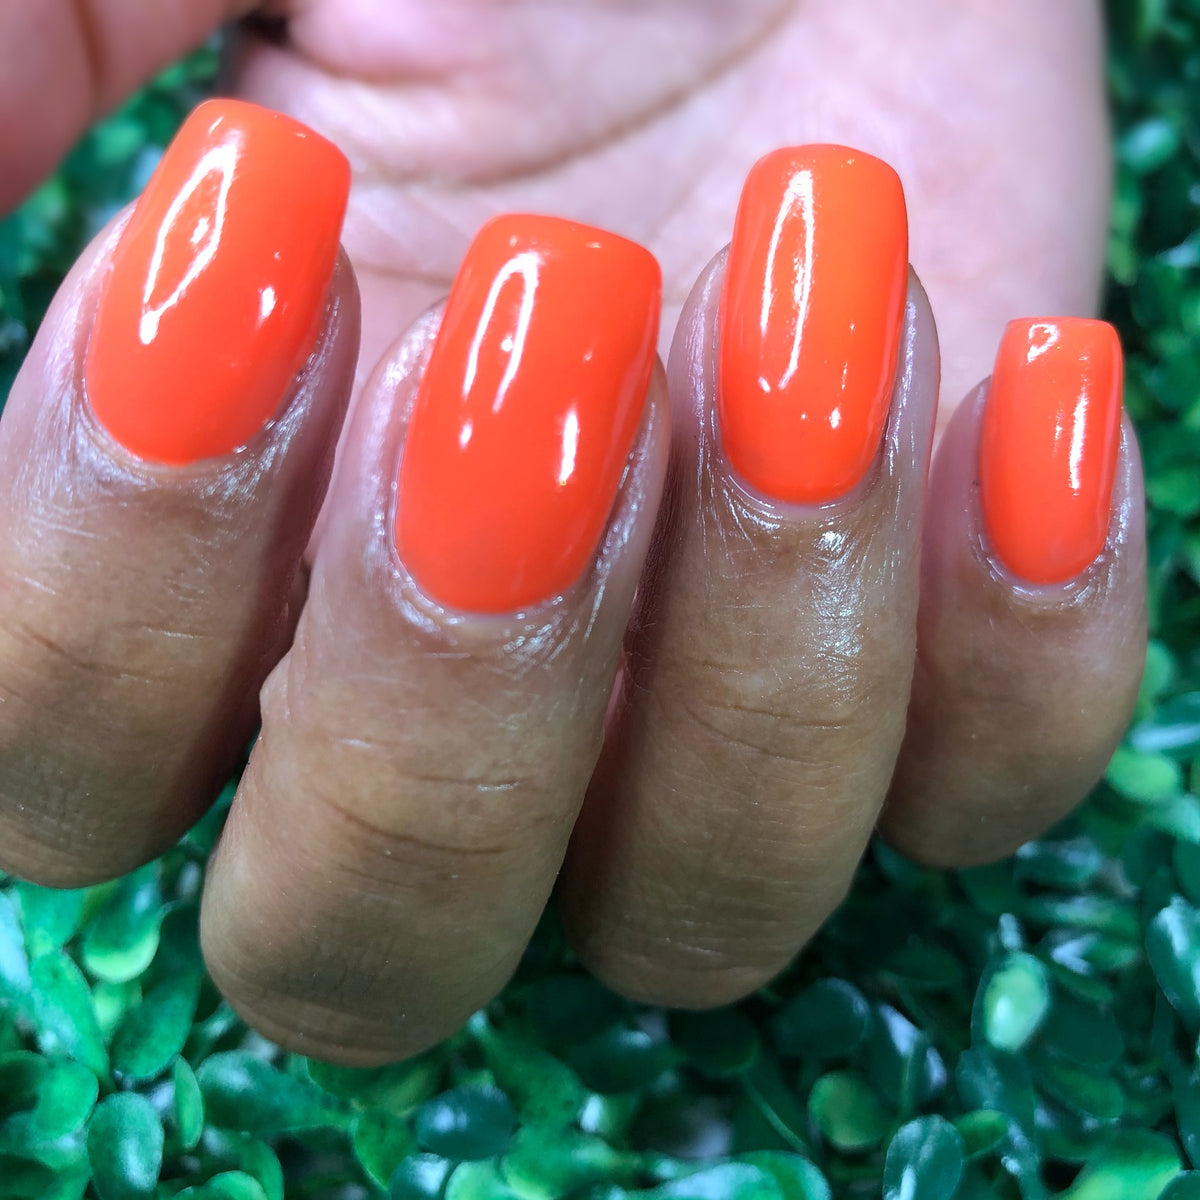 Check Out The Latest Collection Of Orange Nail Polishes From ILMP